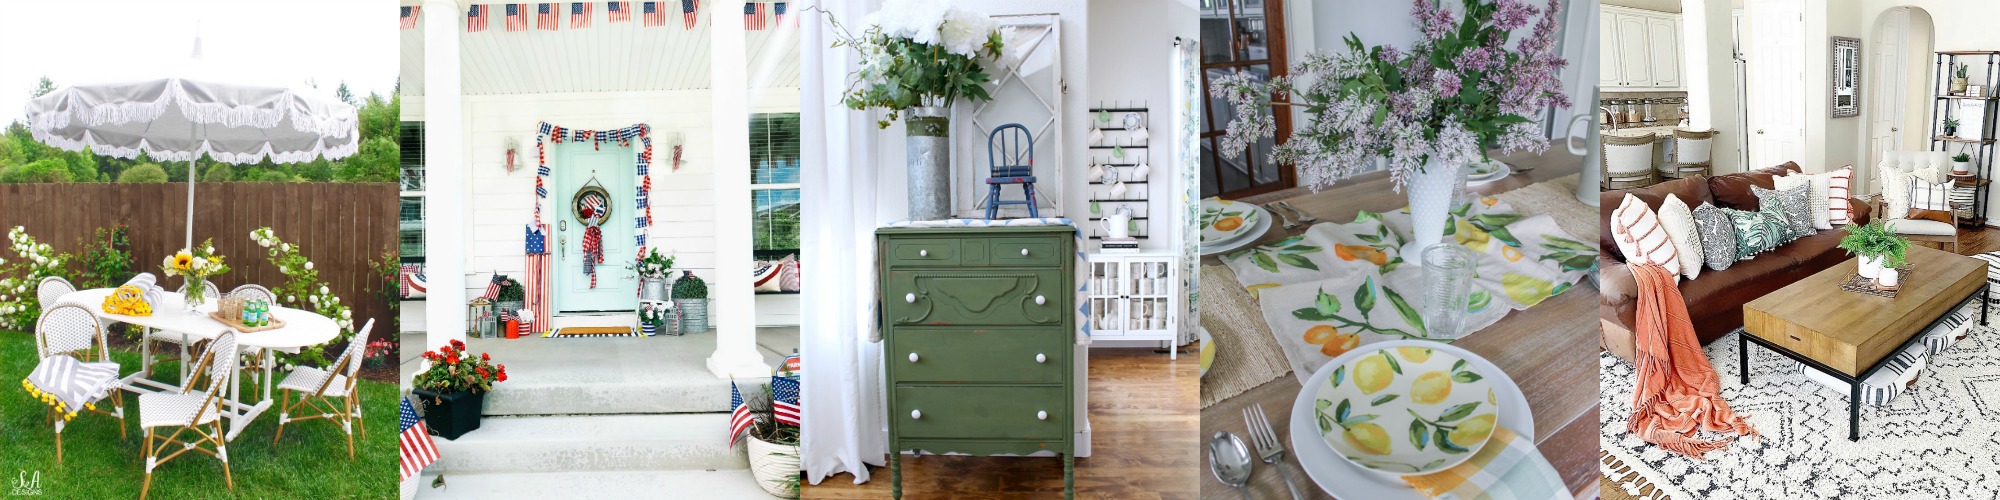 5 blogger homes decorated for summer.